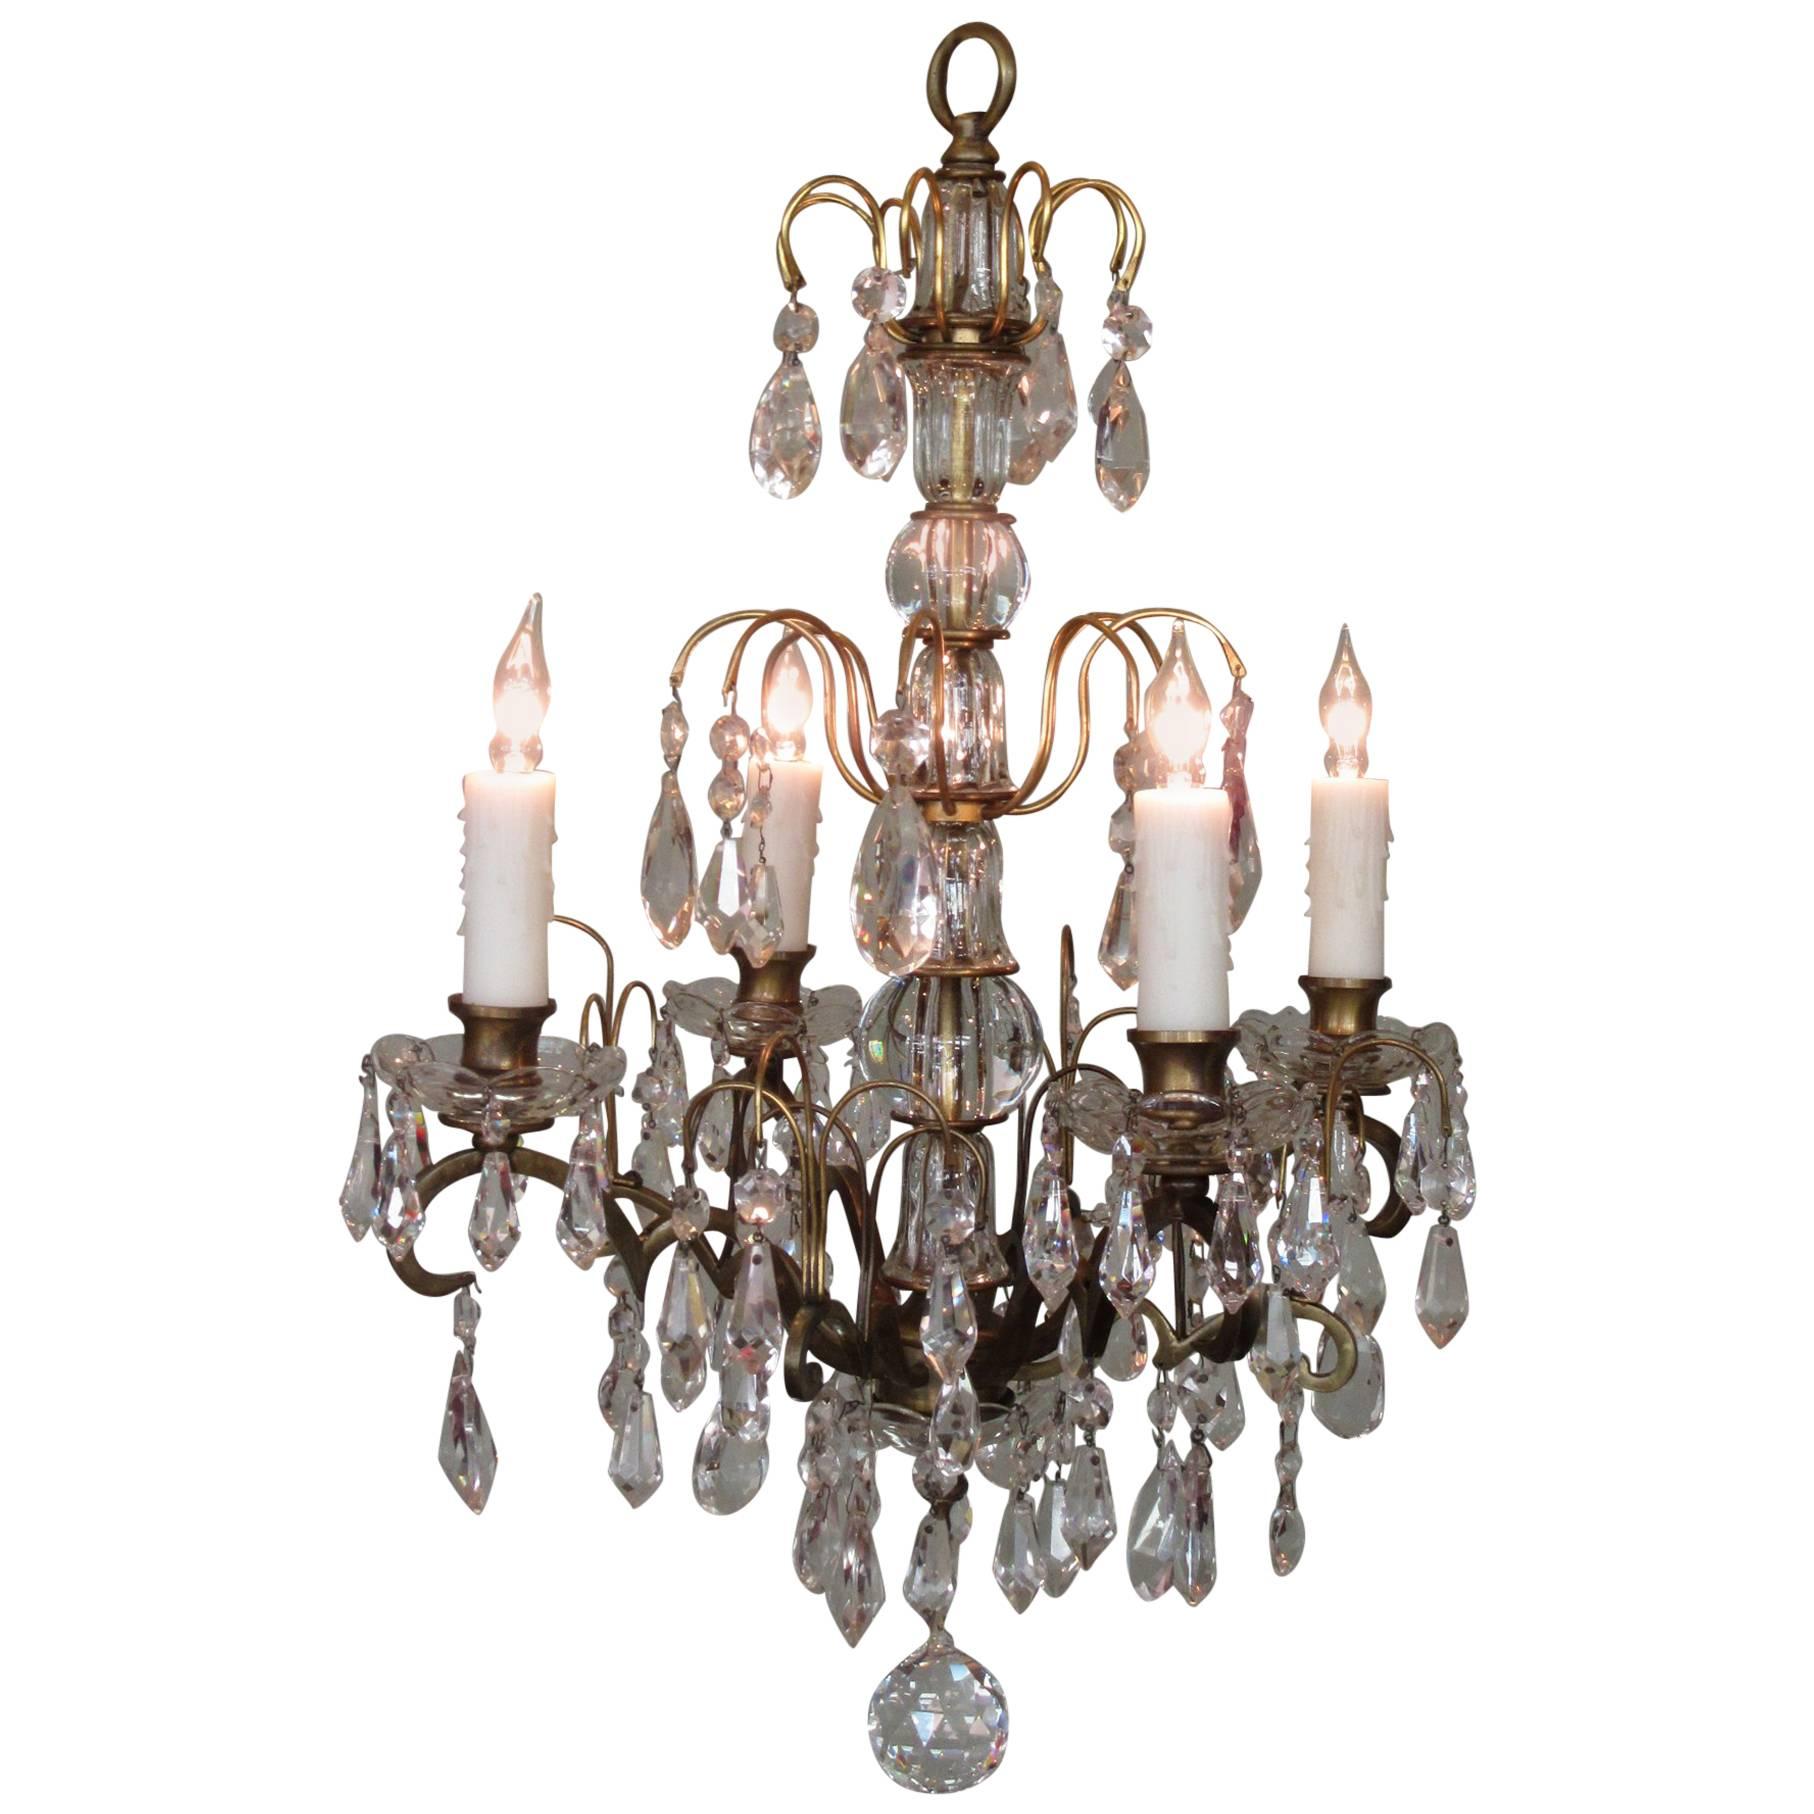 Small Early 20th Century Italian Bronze and Crystal Waterfall Chandelier